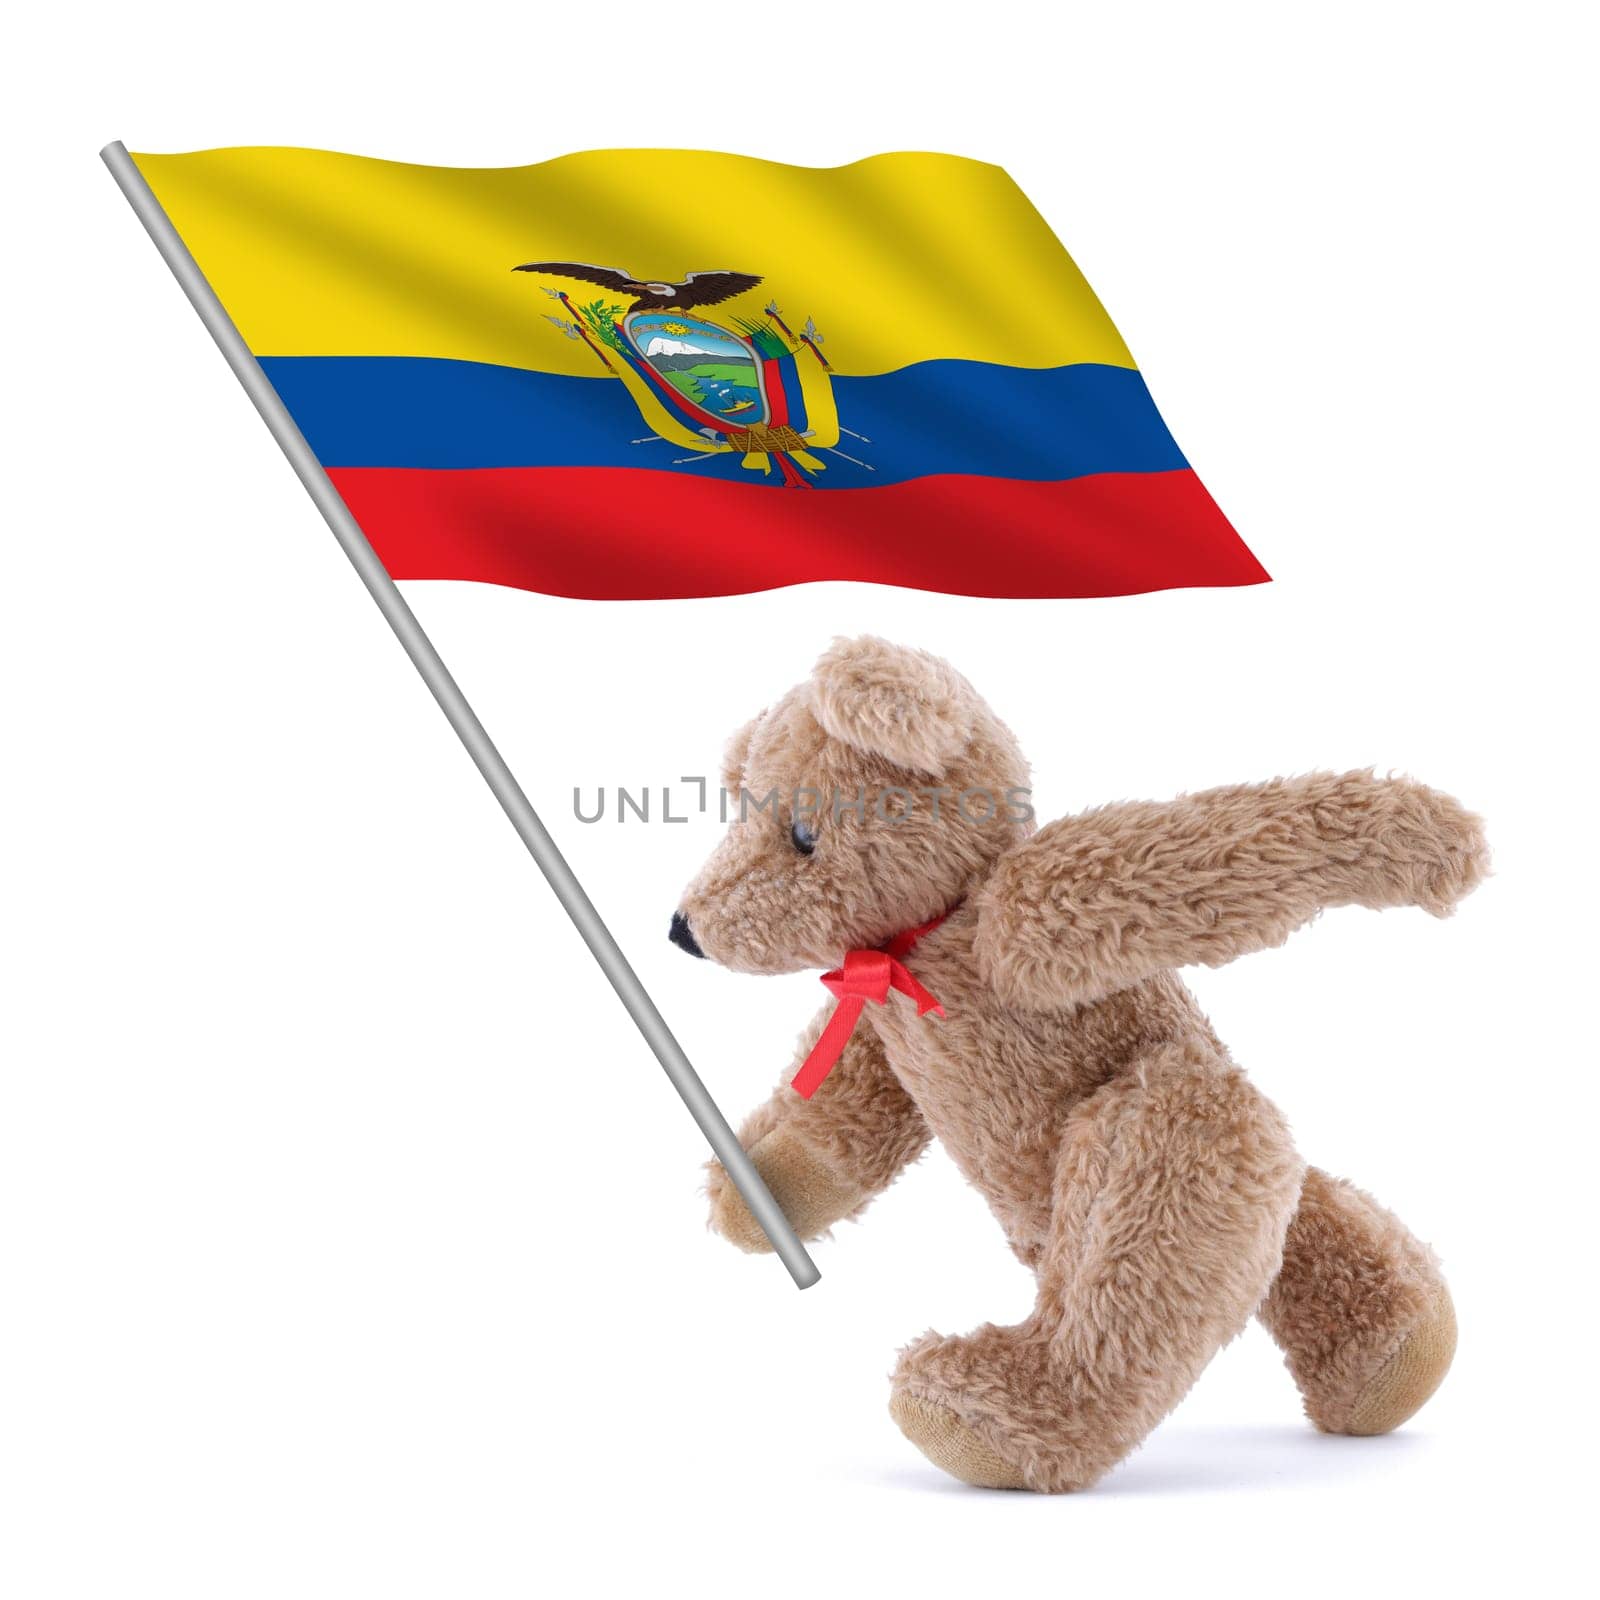 Ecuador flag being carried by a cute teddy bear by VivacityImages